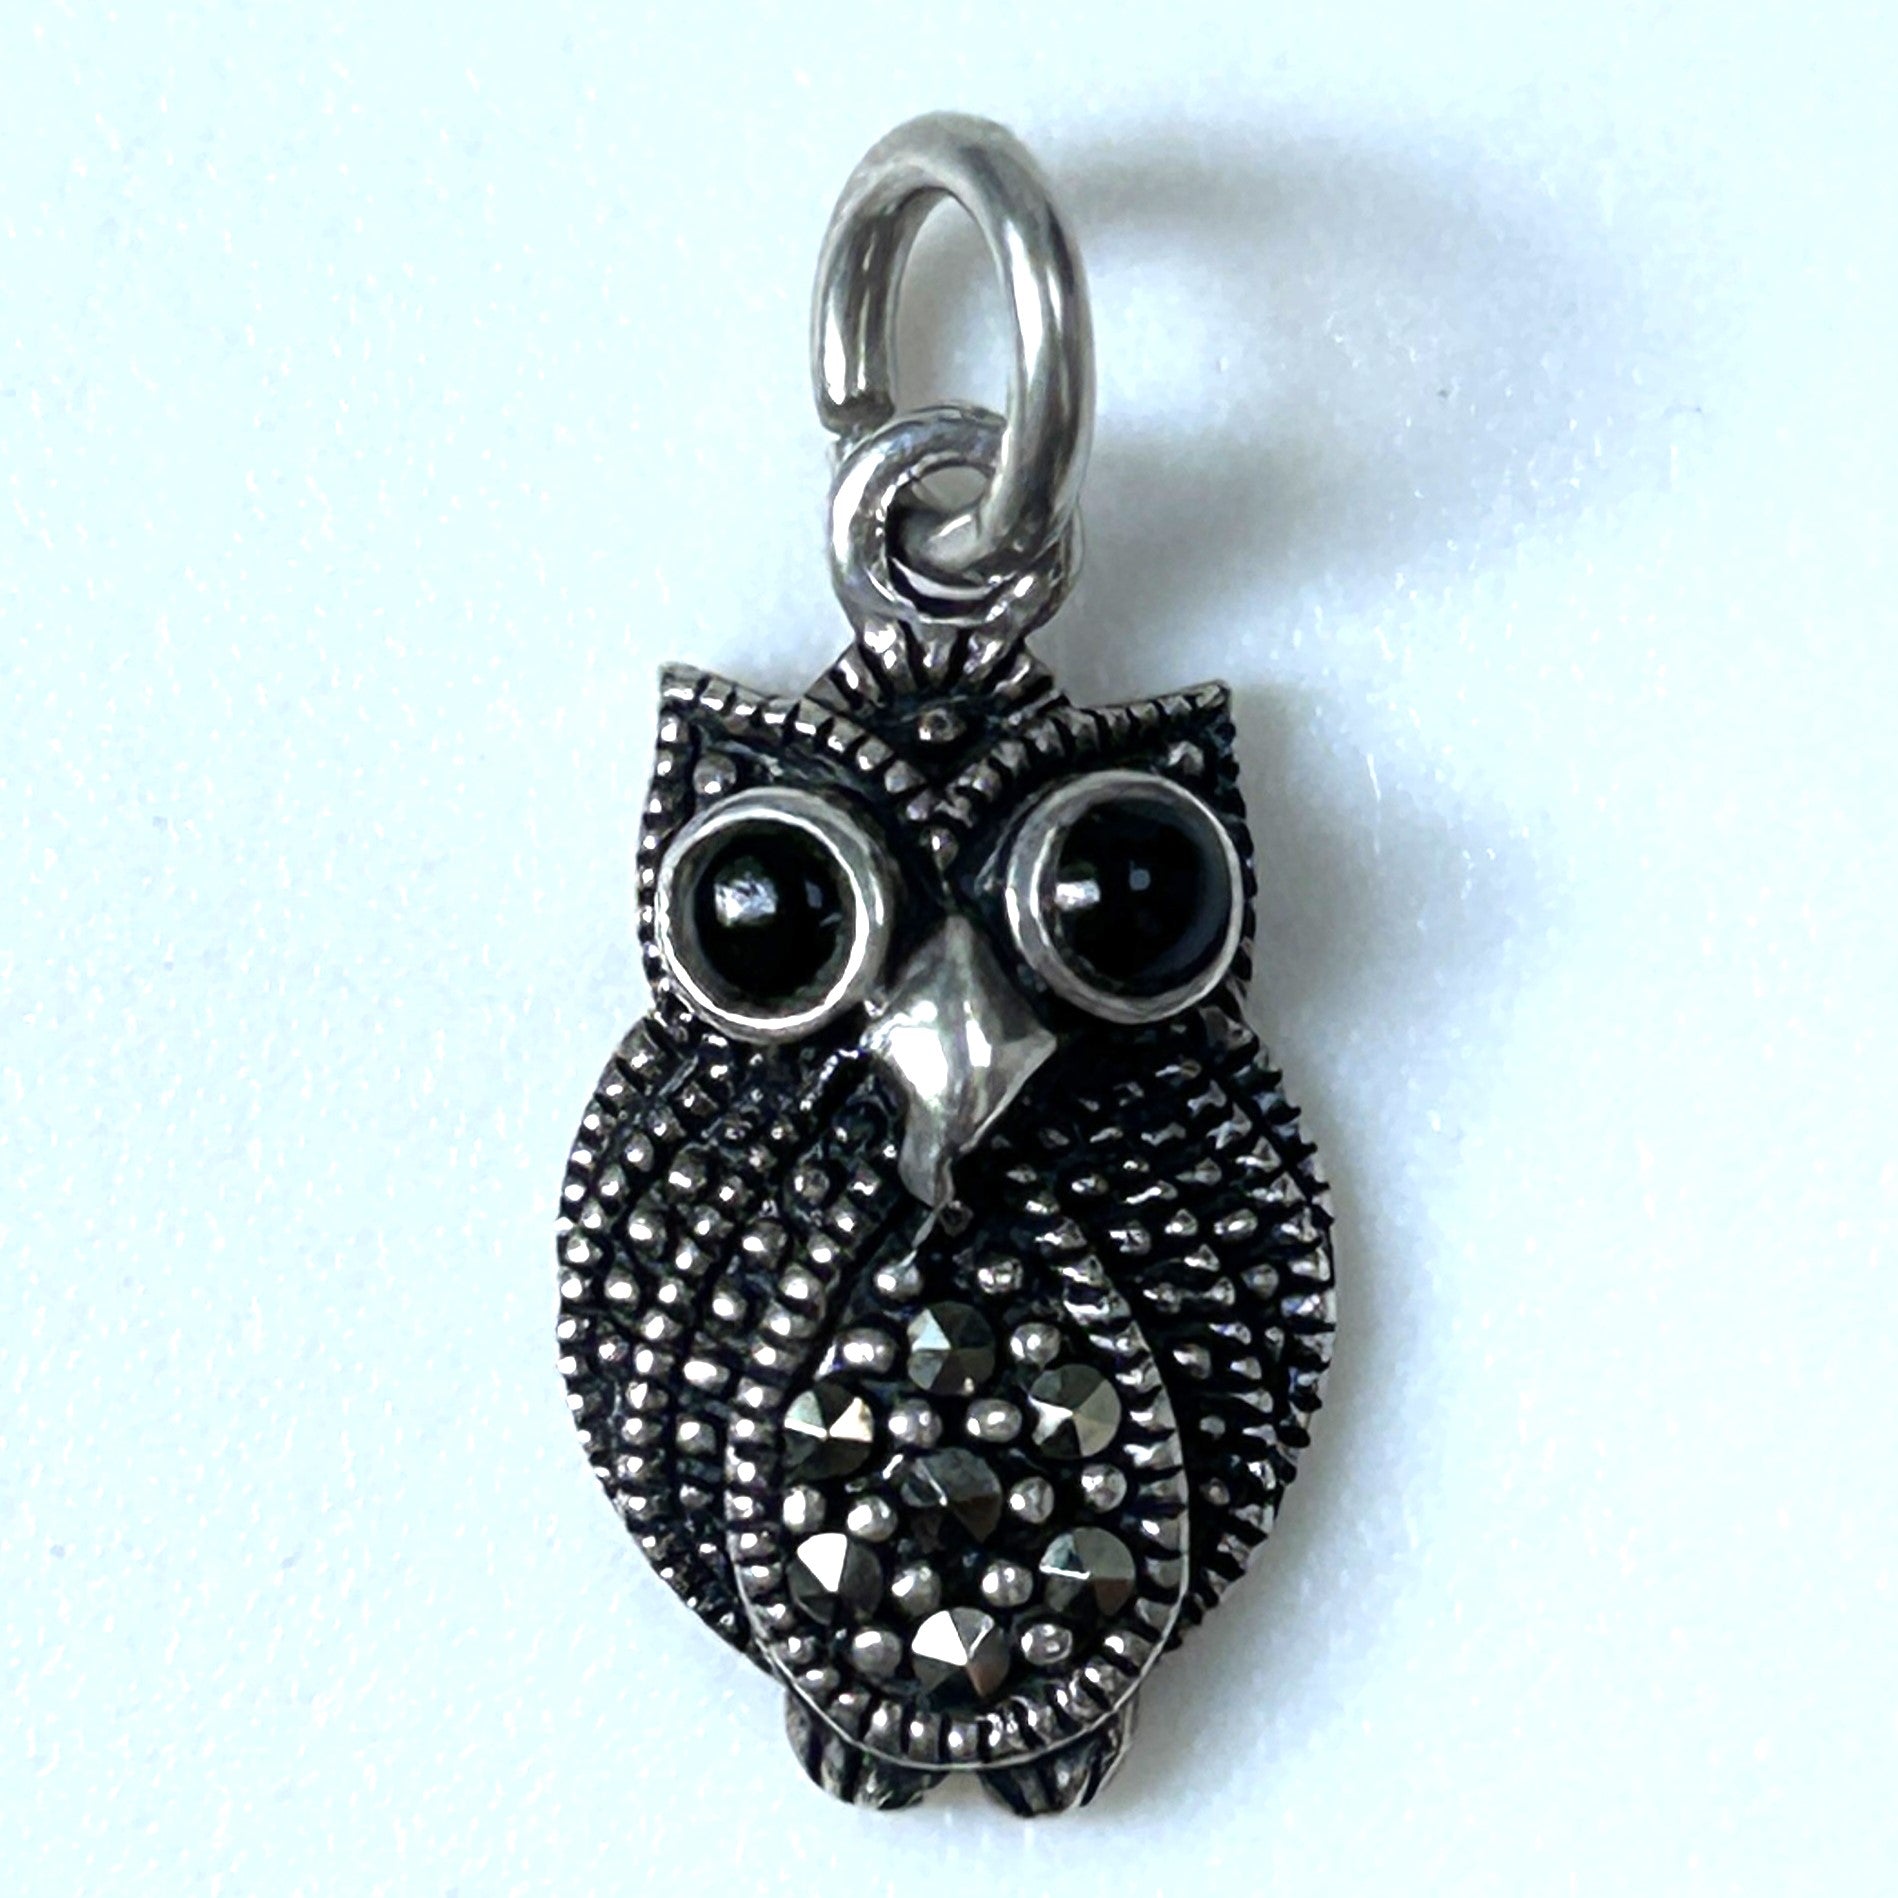 Small Sterling Silver, Onyx and Marcasite “Owl” Charm Pendant